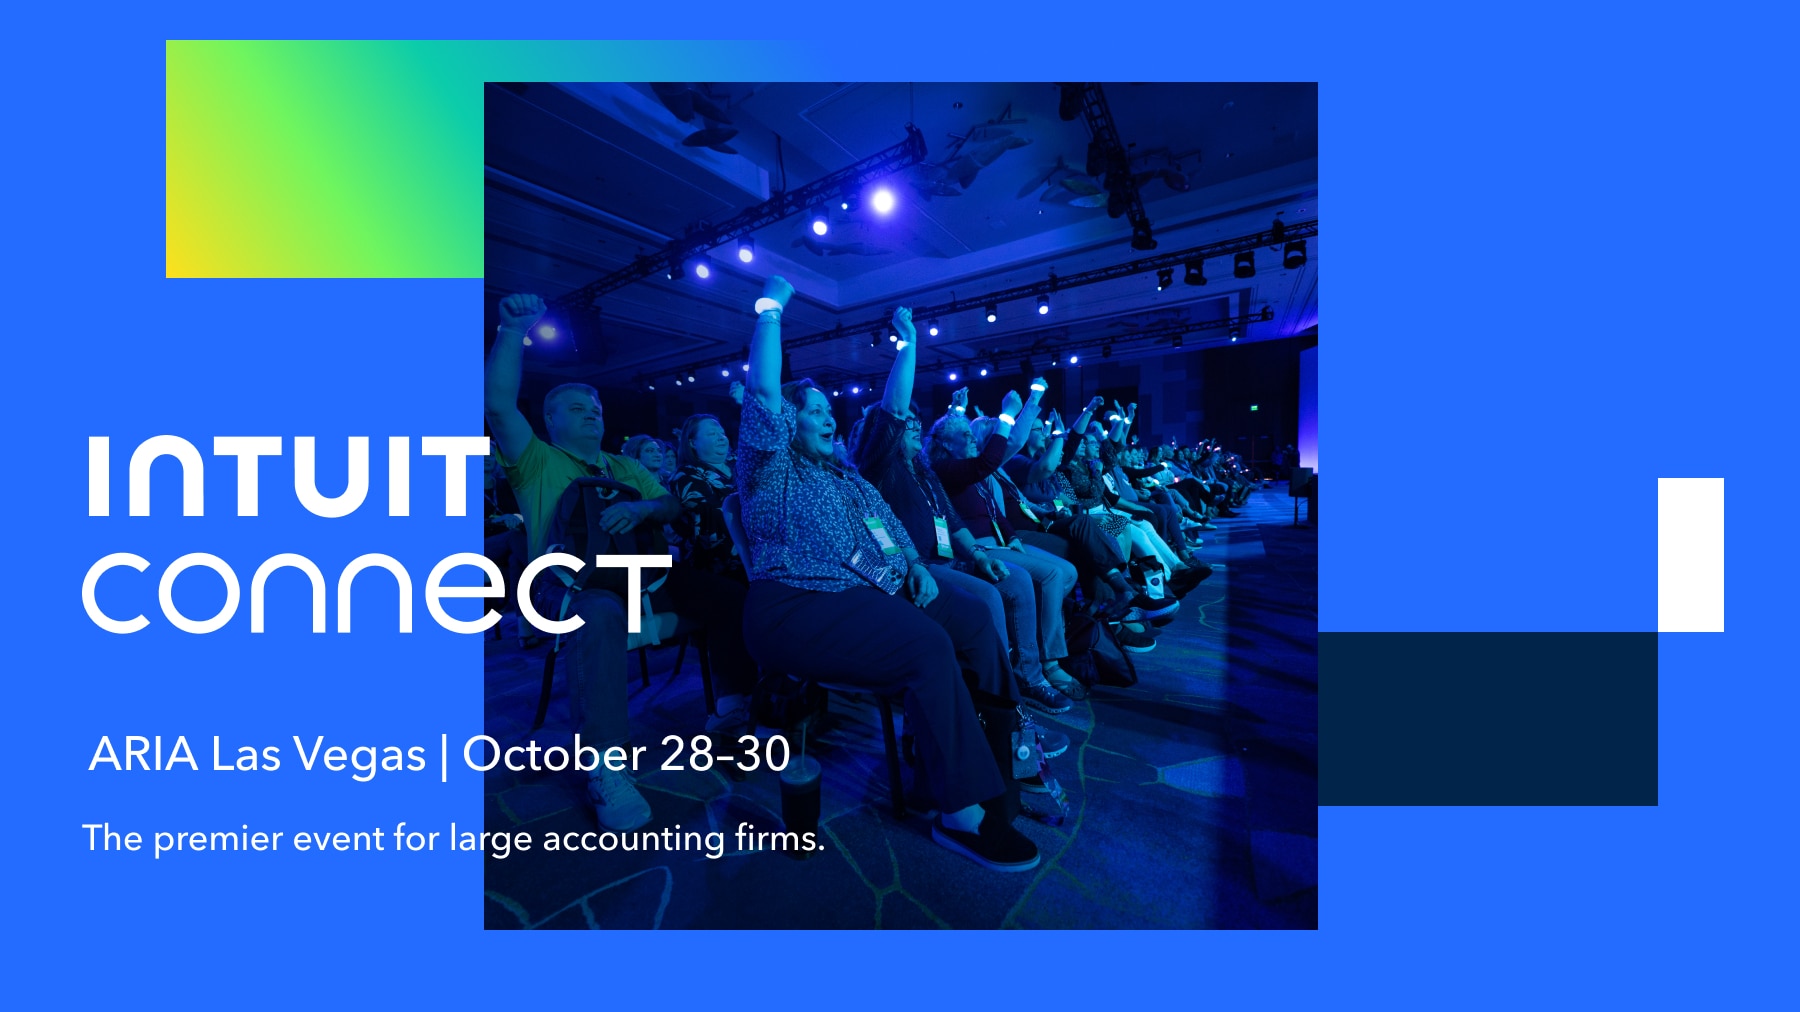 Intuit Connect: THE event for accounting leaders at the ARIA Las Vega